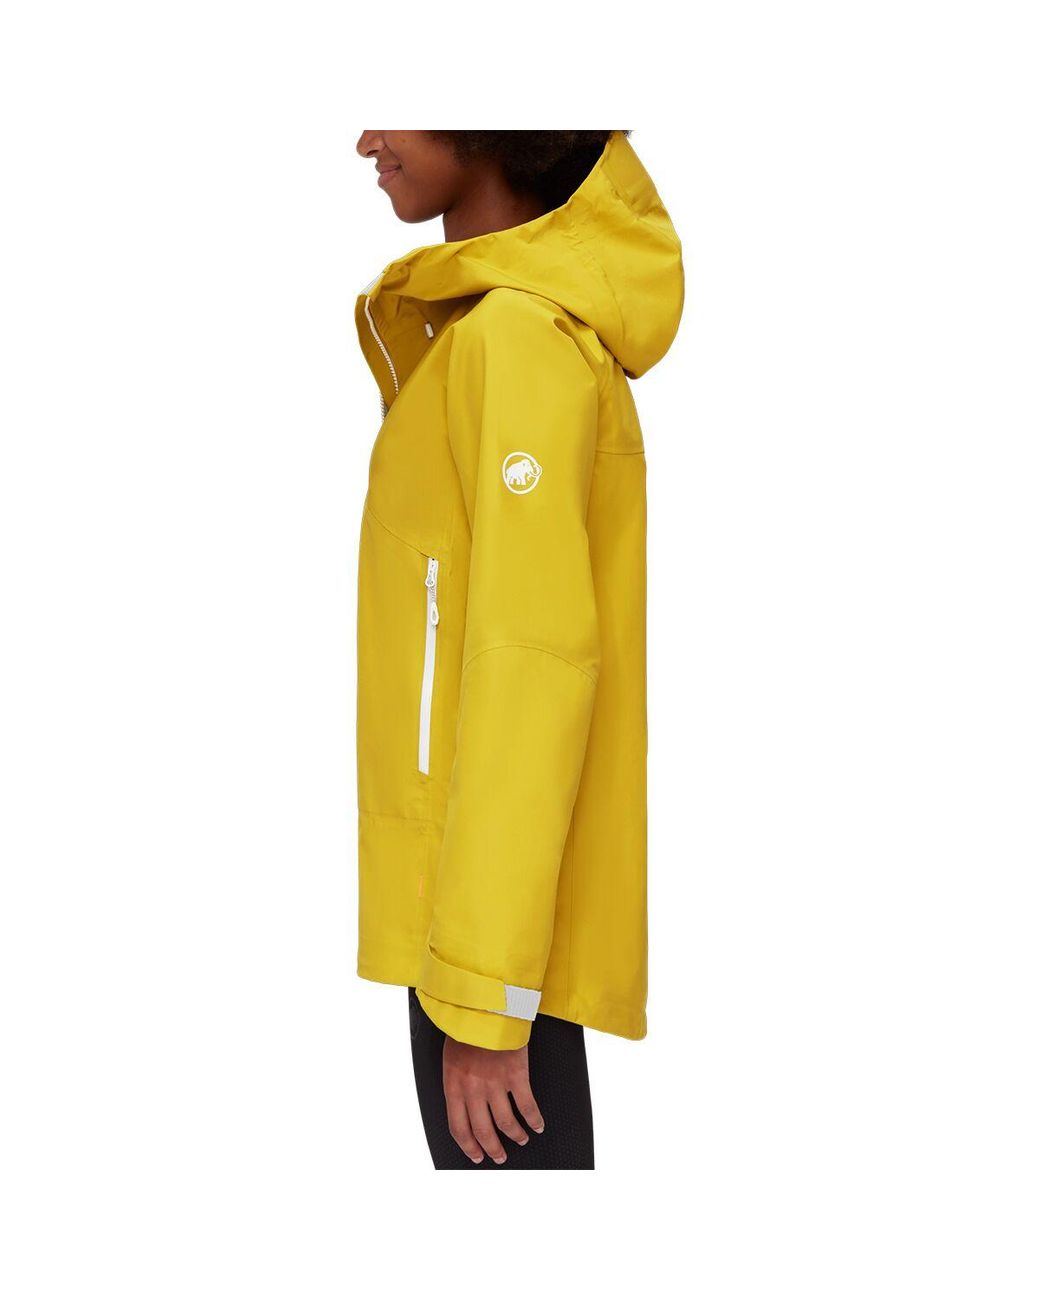 Mammut Crater Hs Hooded Jacket in Yellow | Lyst